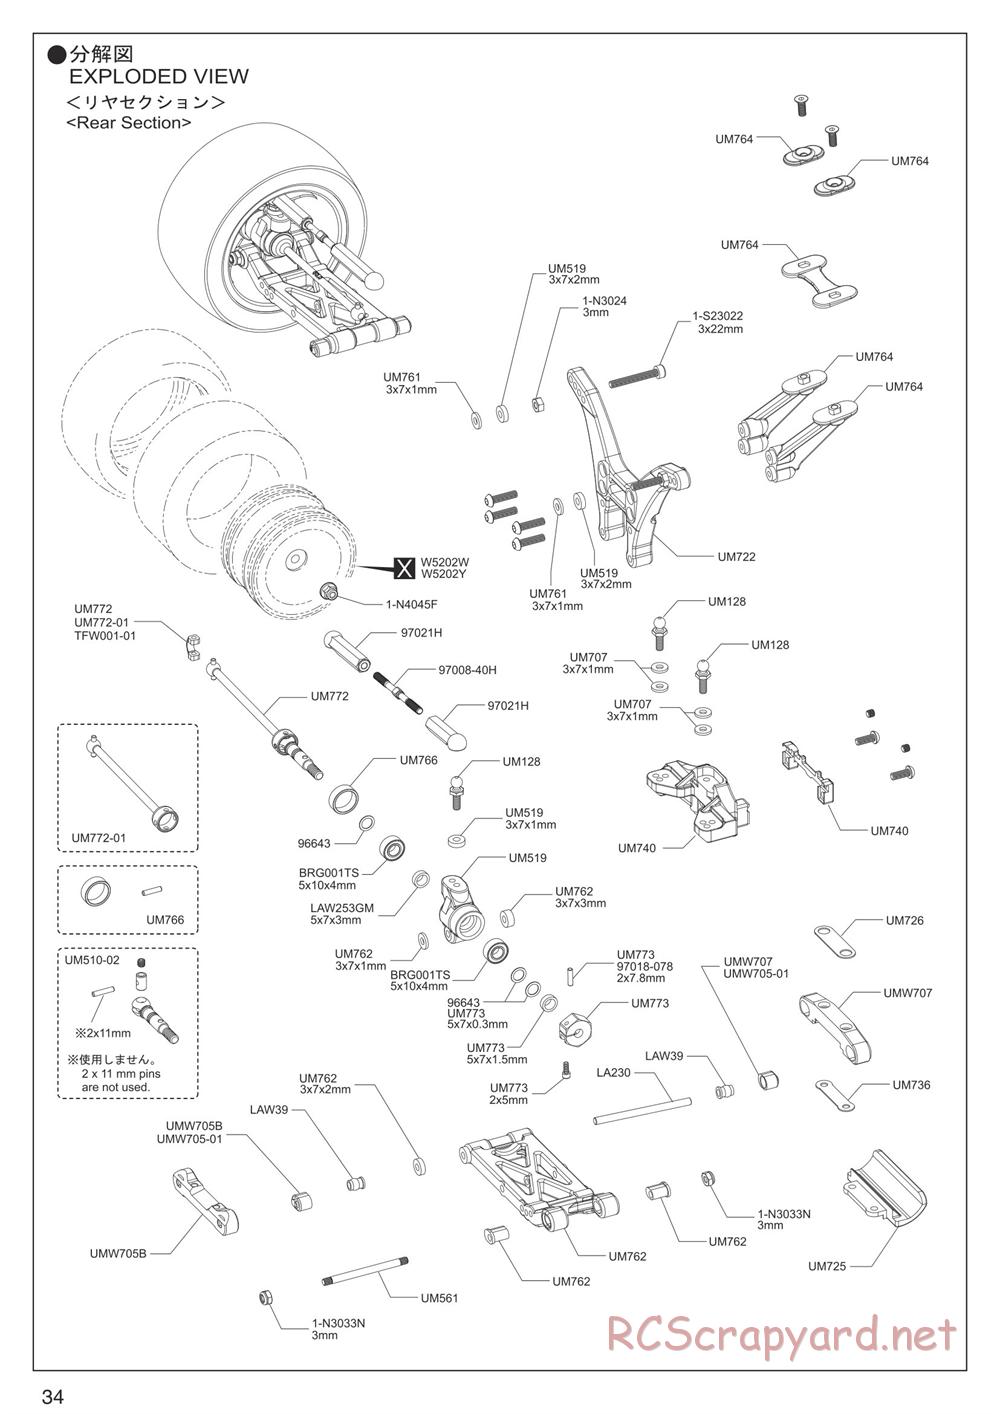 Kyosho - Ultima RB7SS - Exploded Views - Page 4